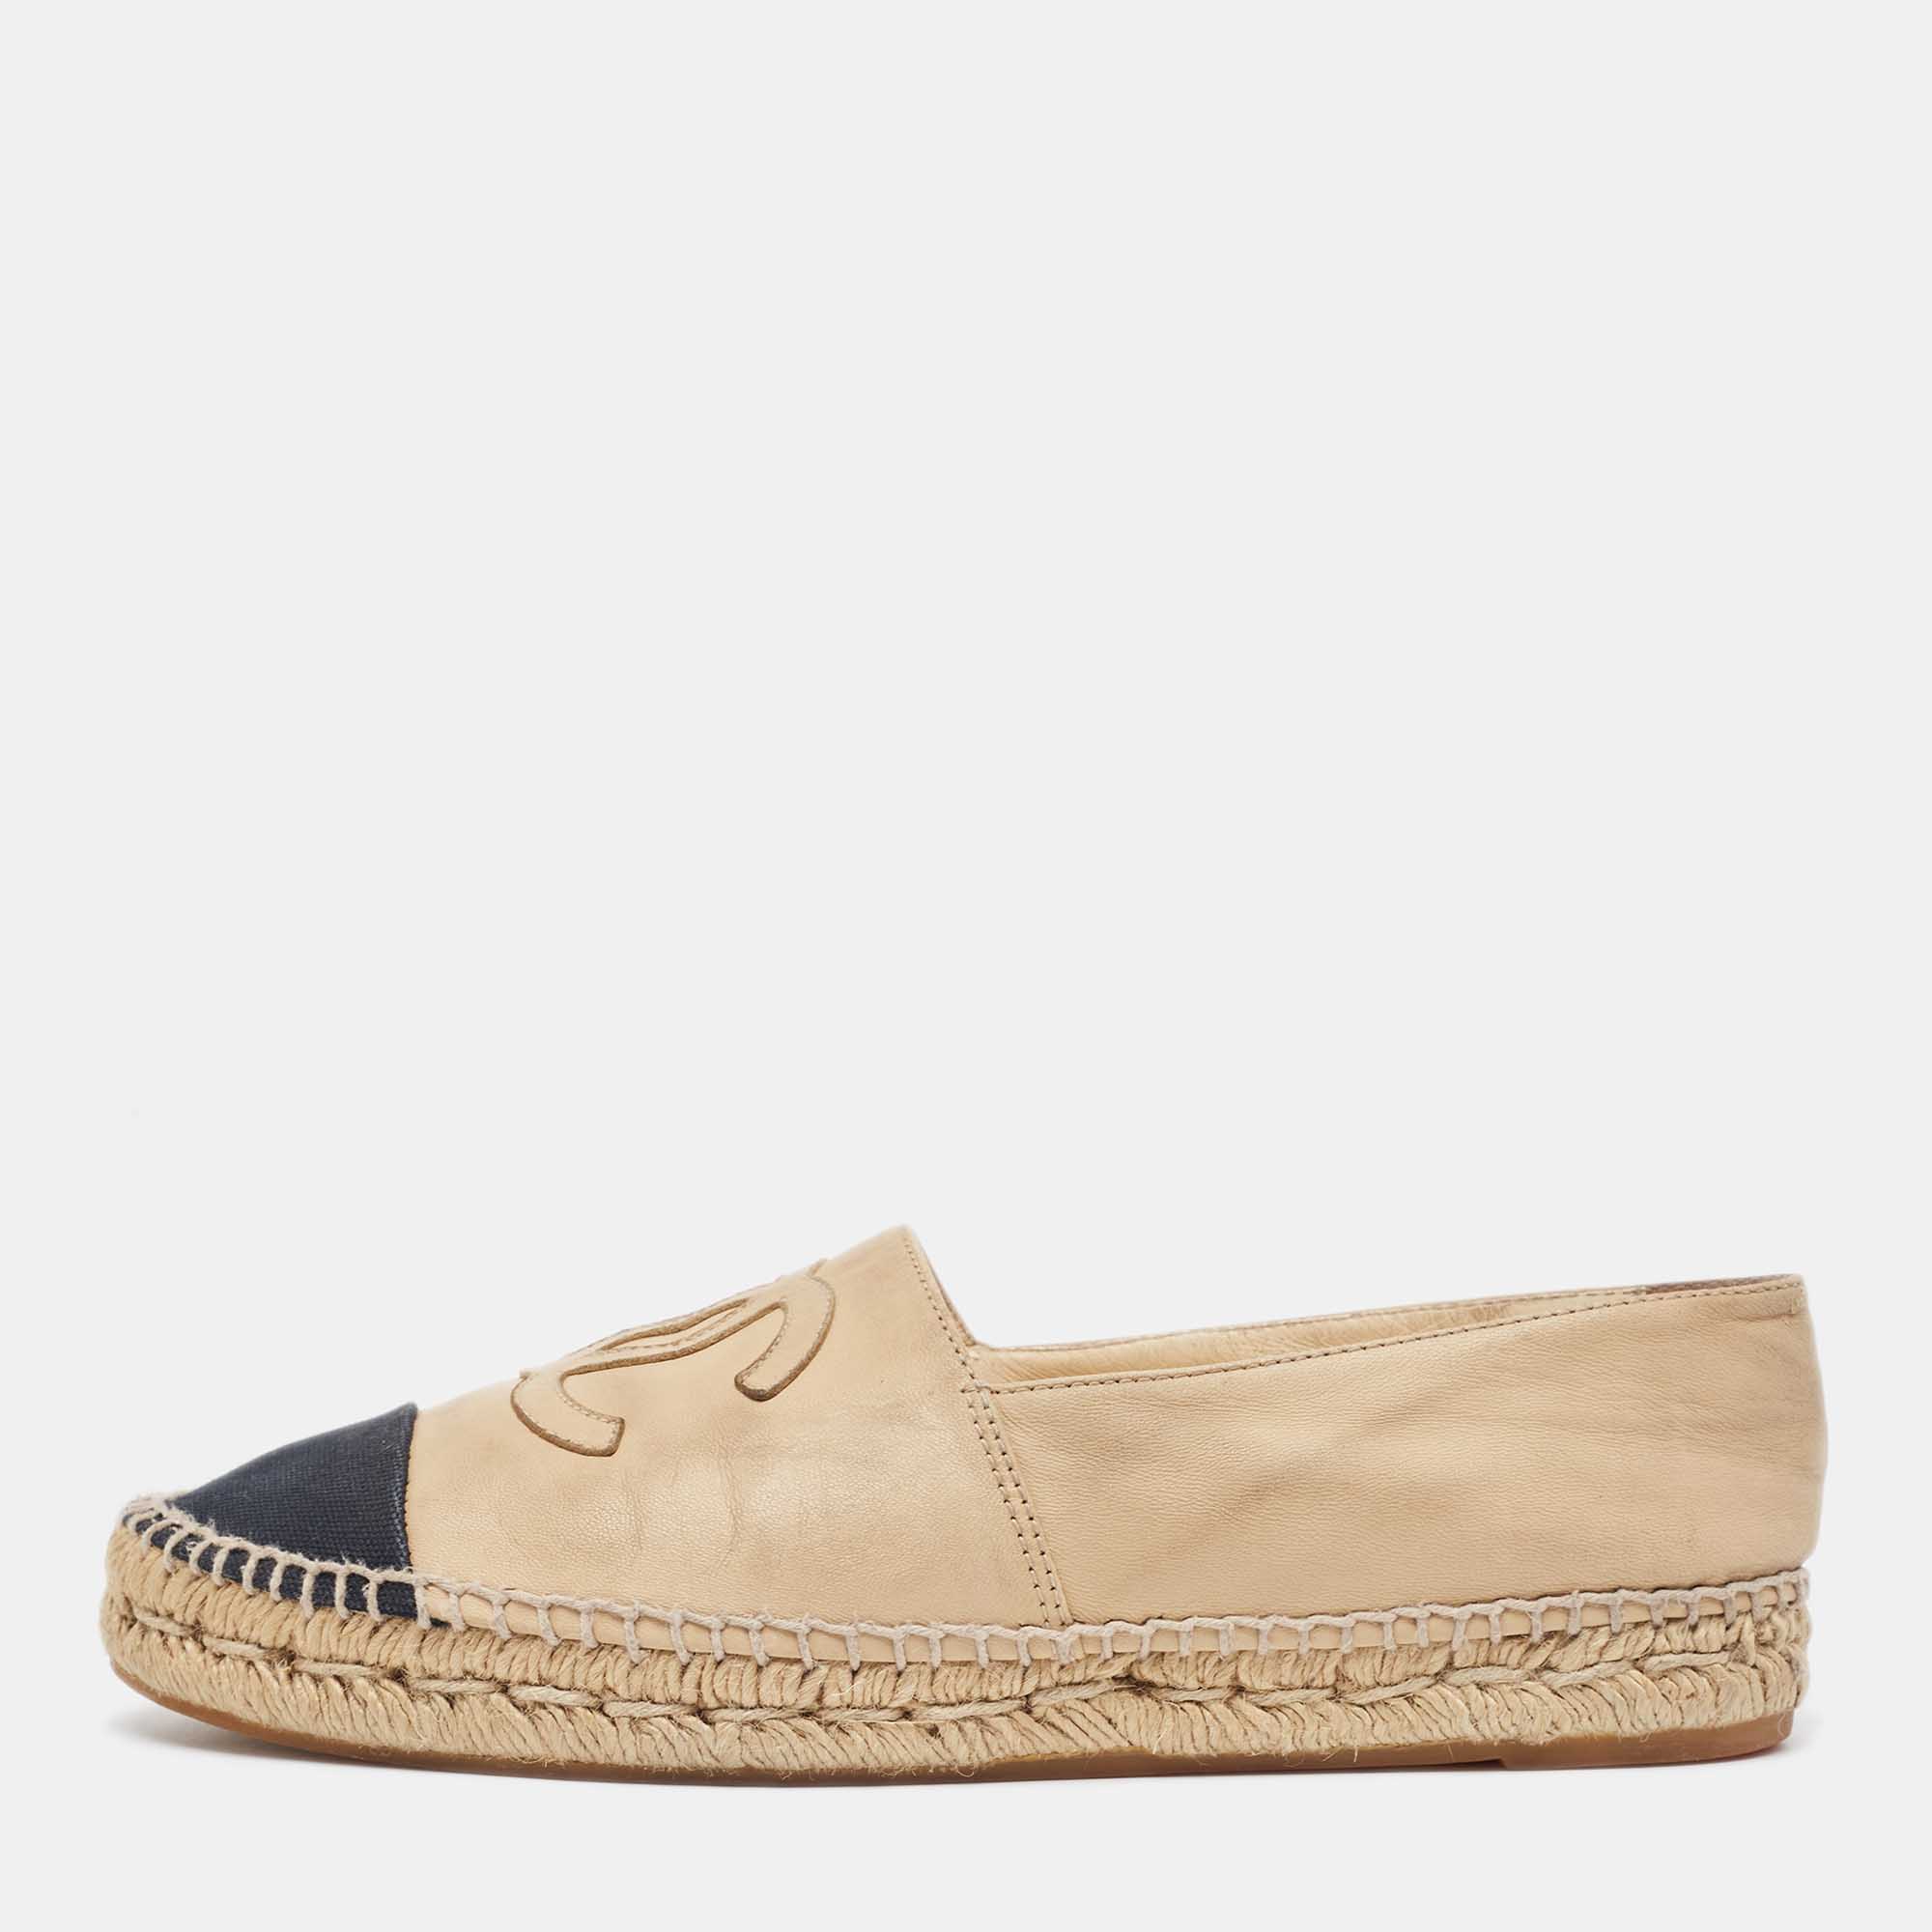 

Chanel Beige/Black Canvas and Leather CC Espadrille Flats Size